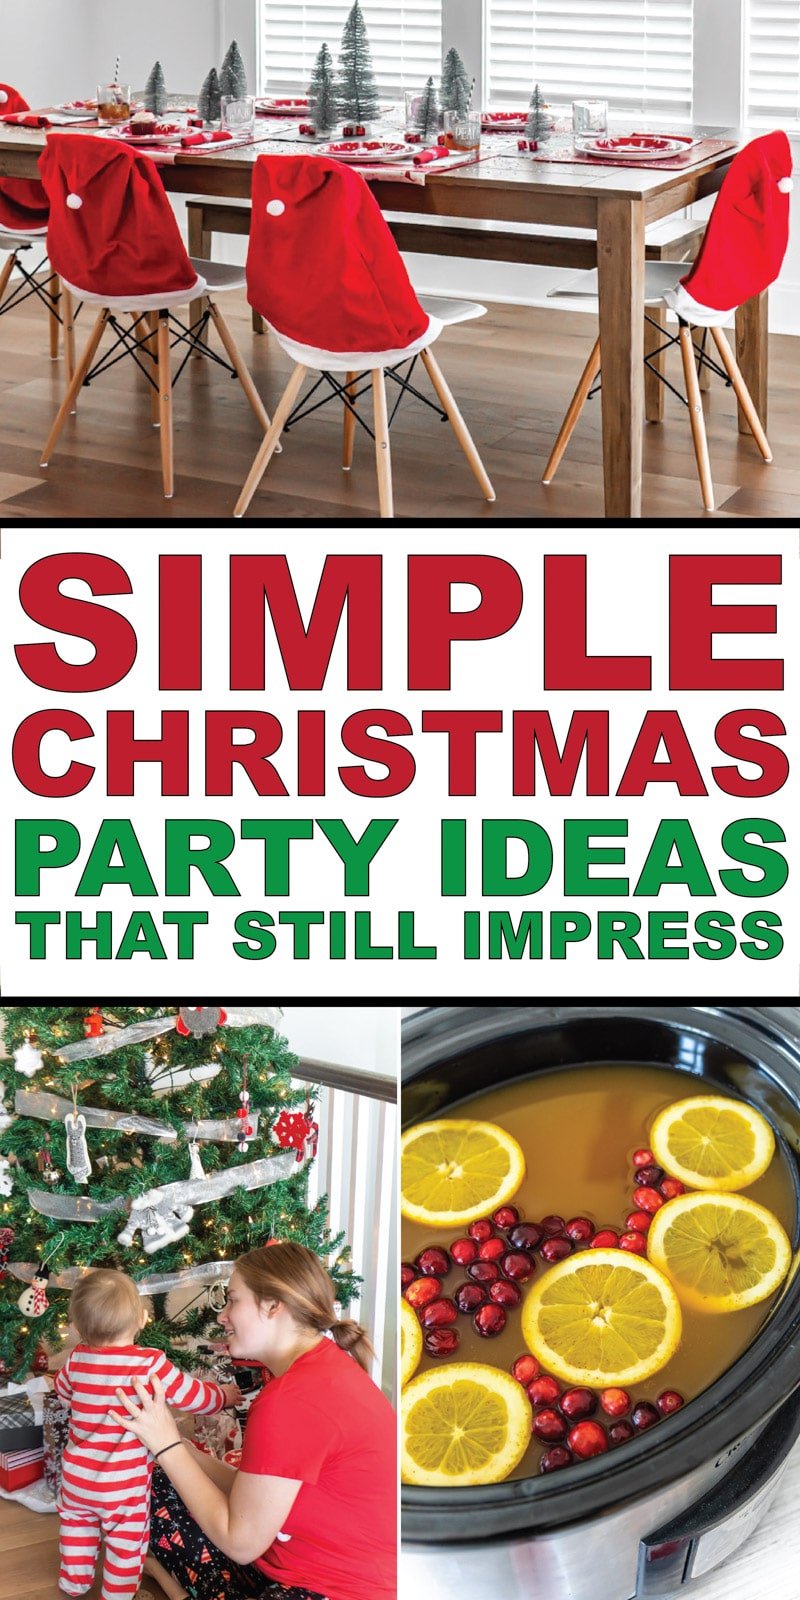 Easy Christmas party ideas for making this holiday season merry and bright! 